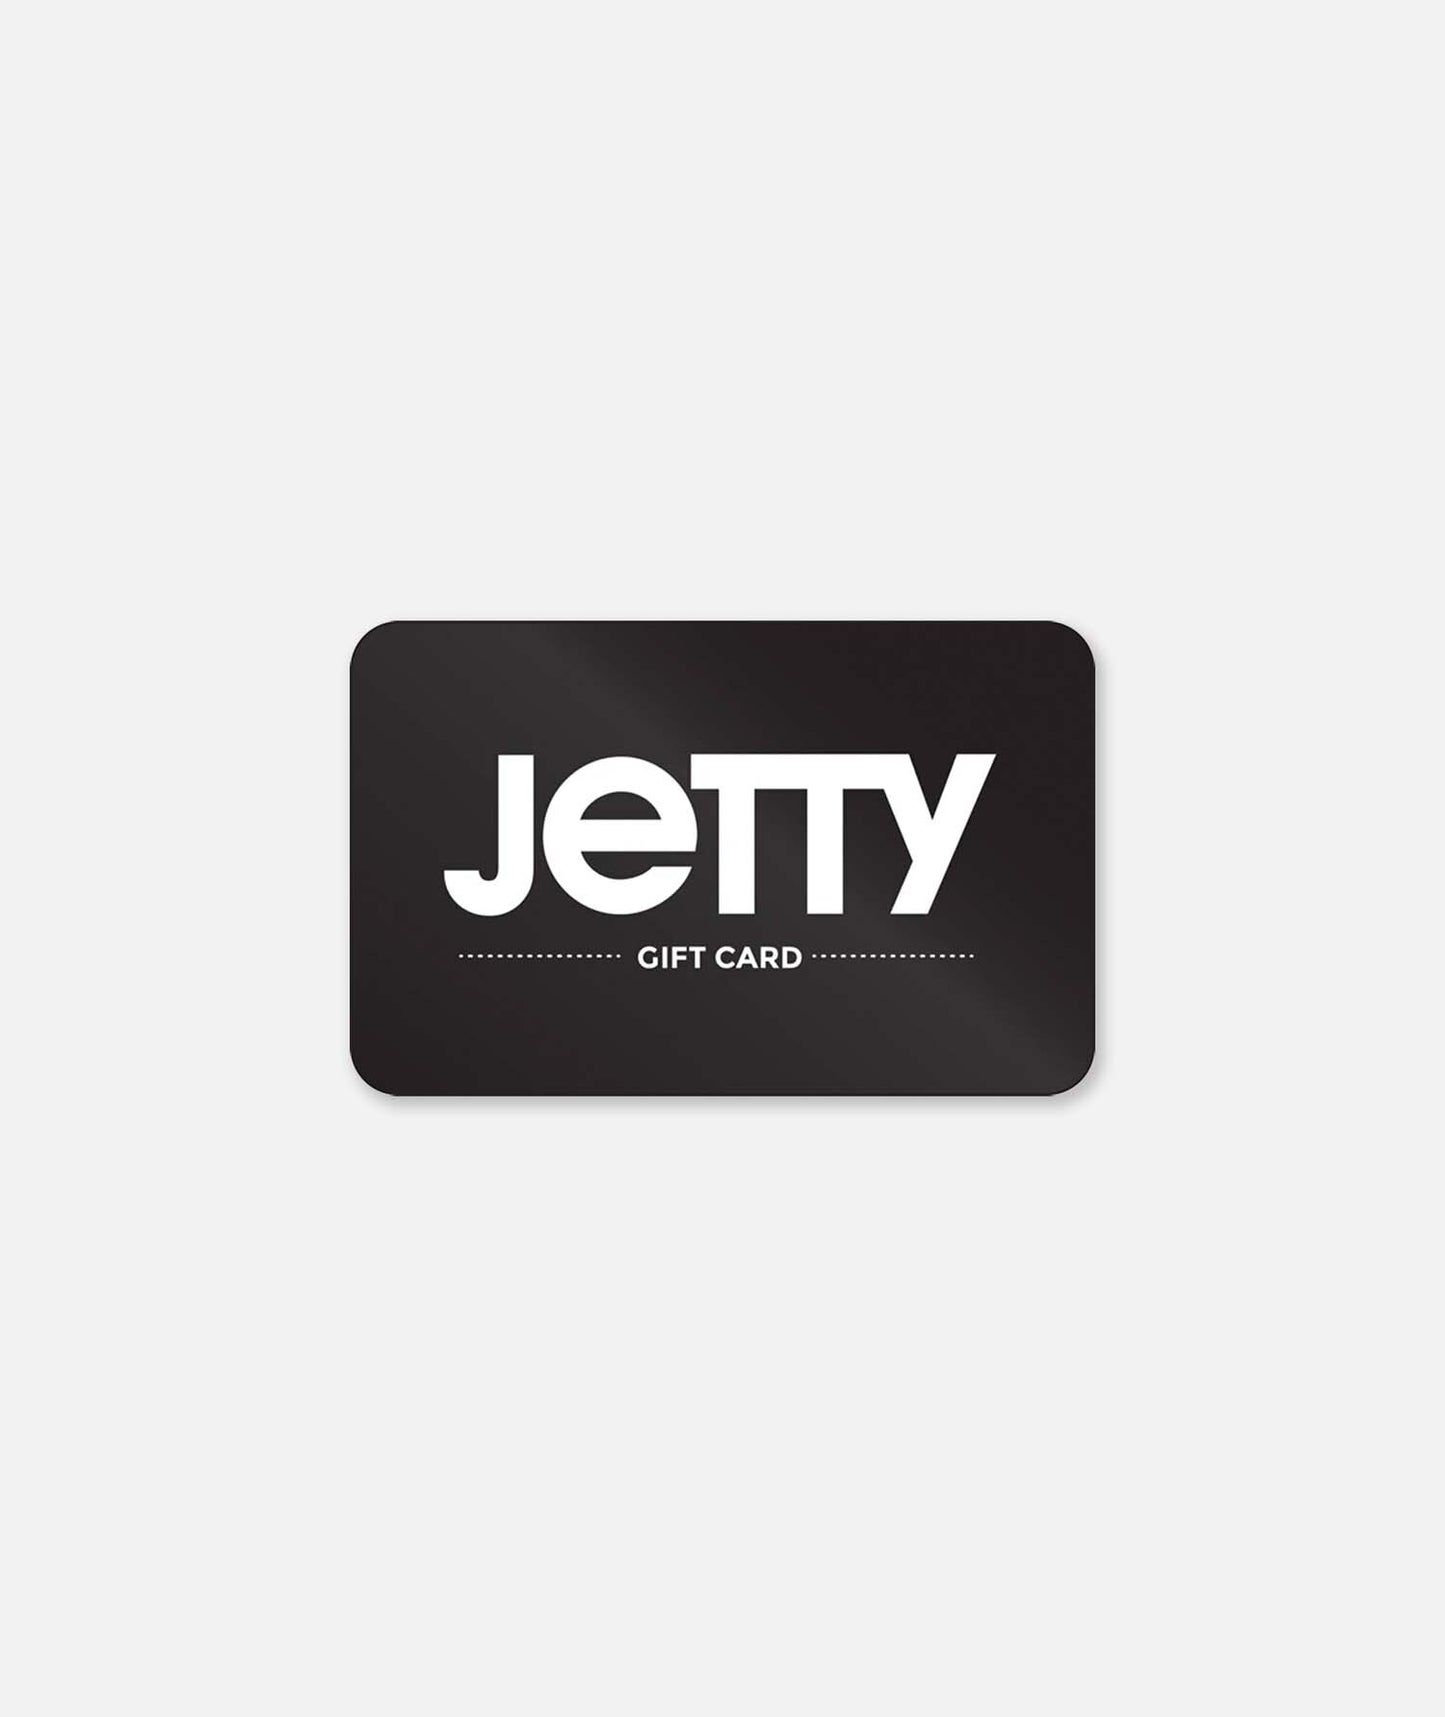 Jetty Physical Gift Card $100